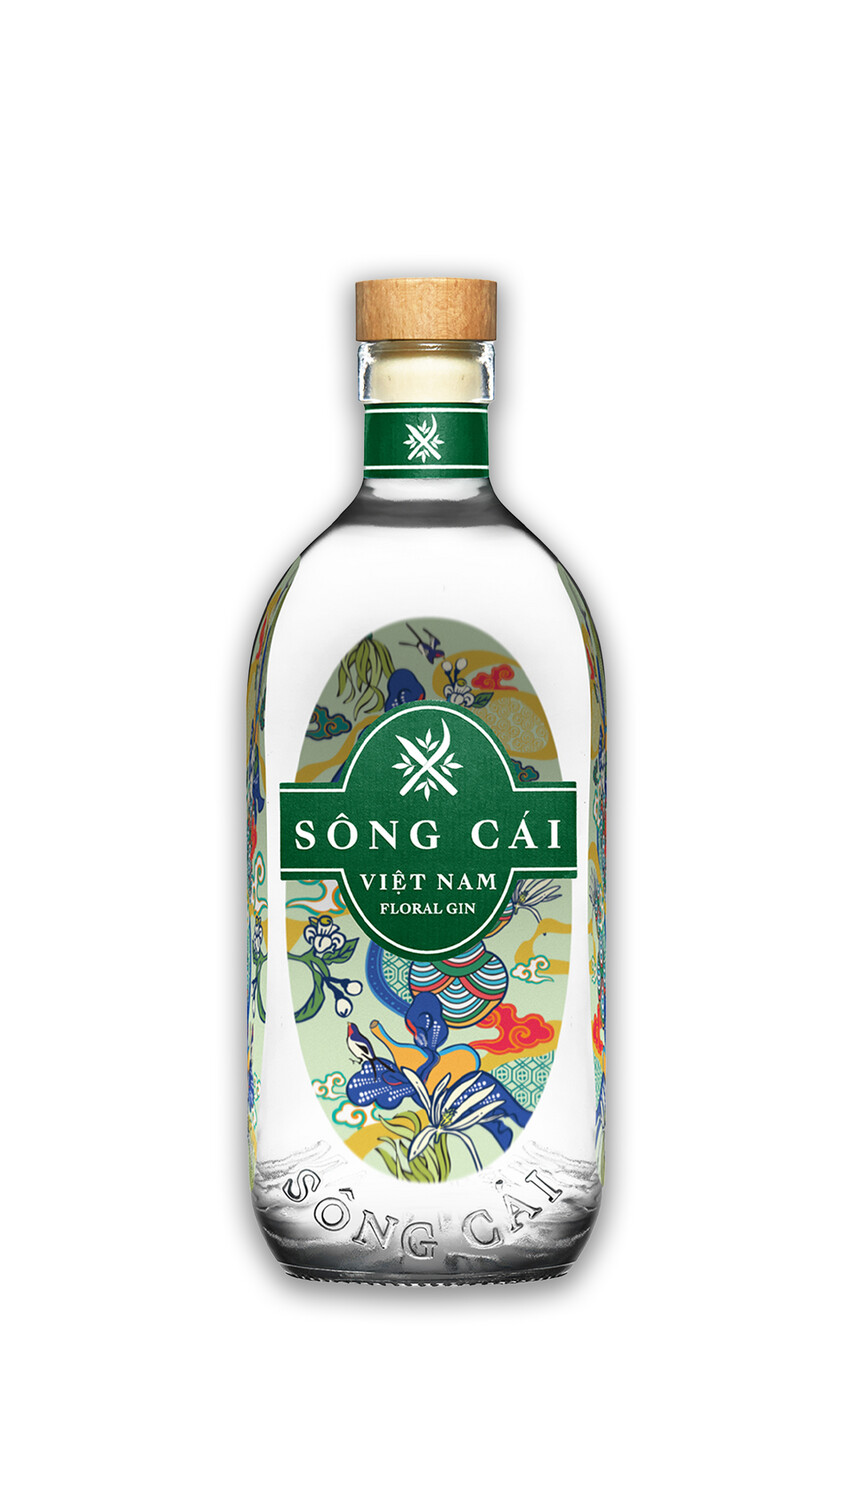 Song Cai Viet Nam Floral Gin floral notes/ spice